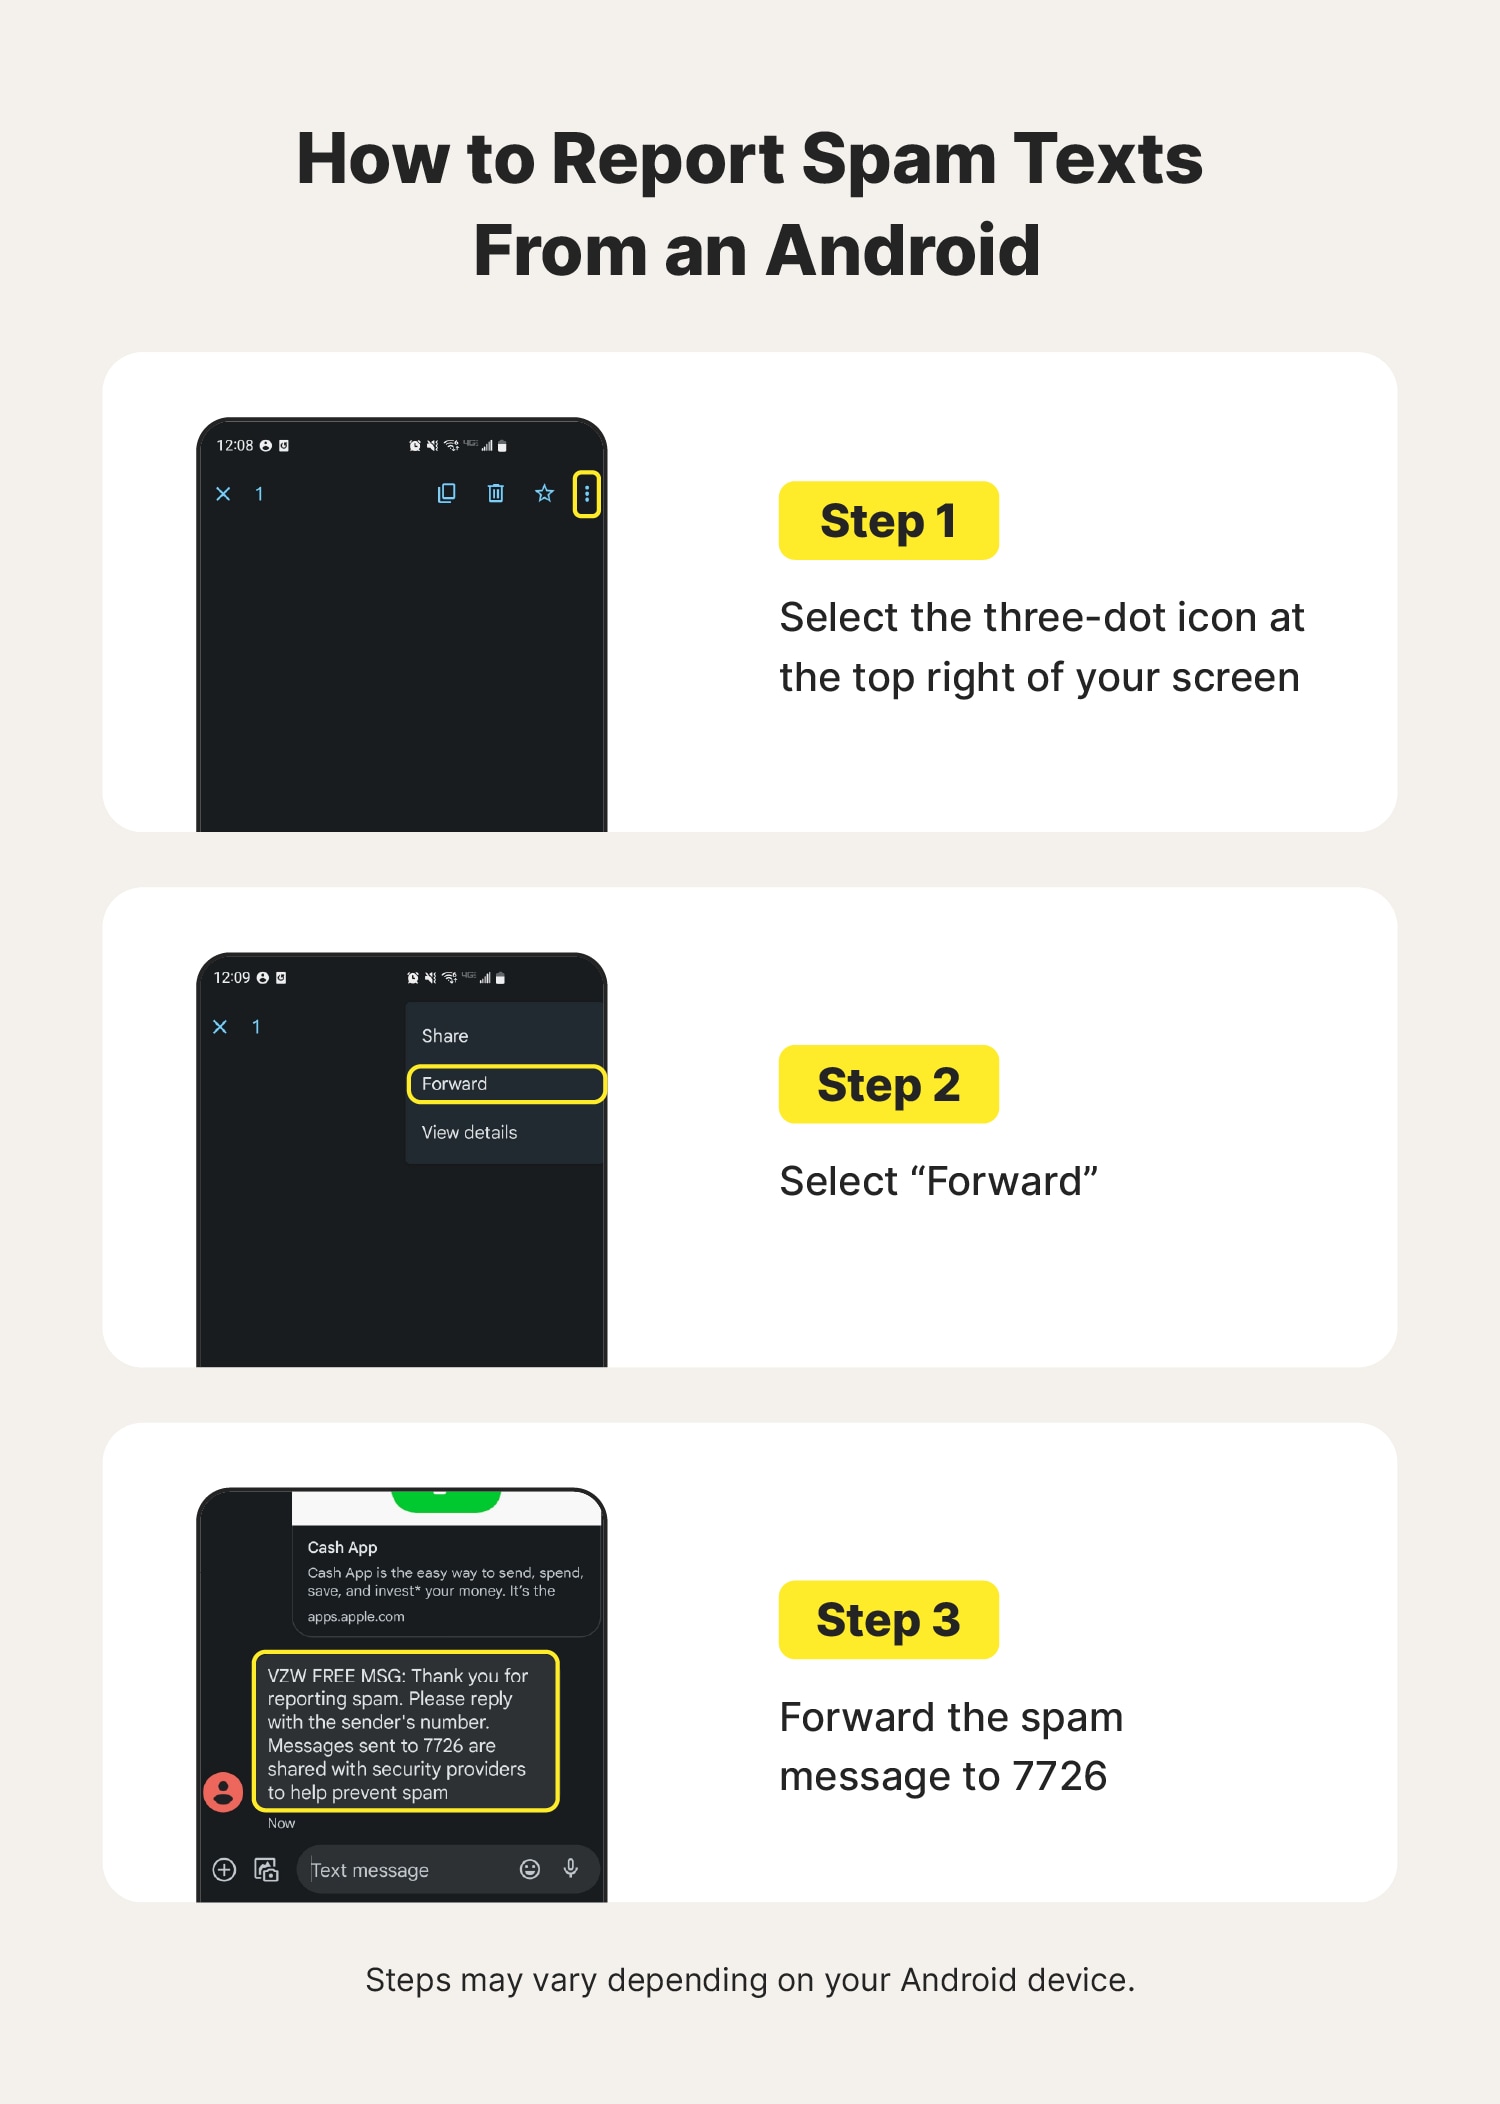 Step-by-step visual instructions on how to report spam texts on an Android phone.